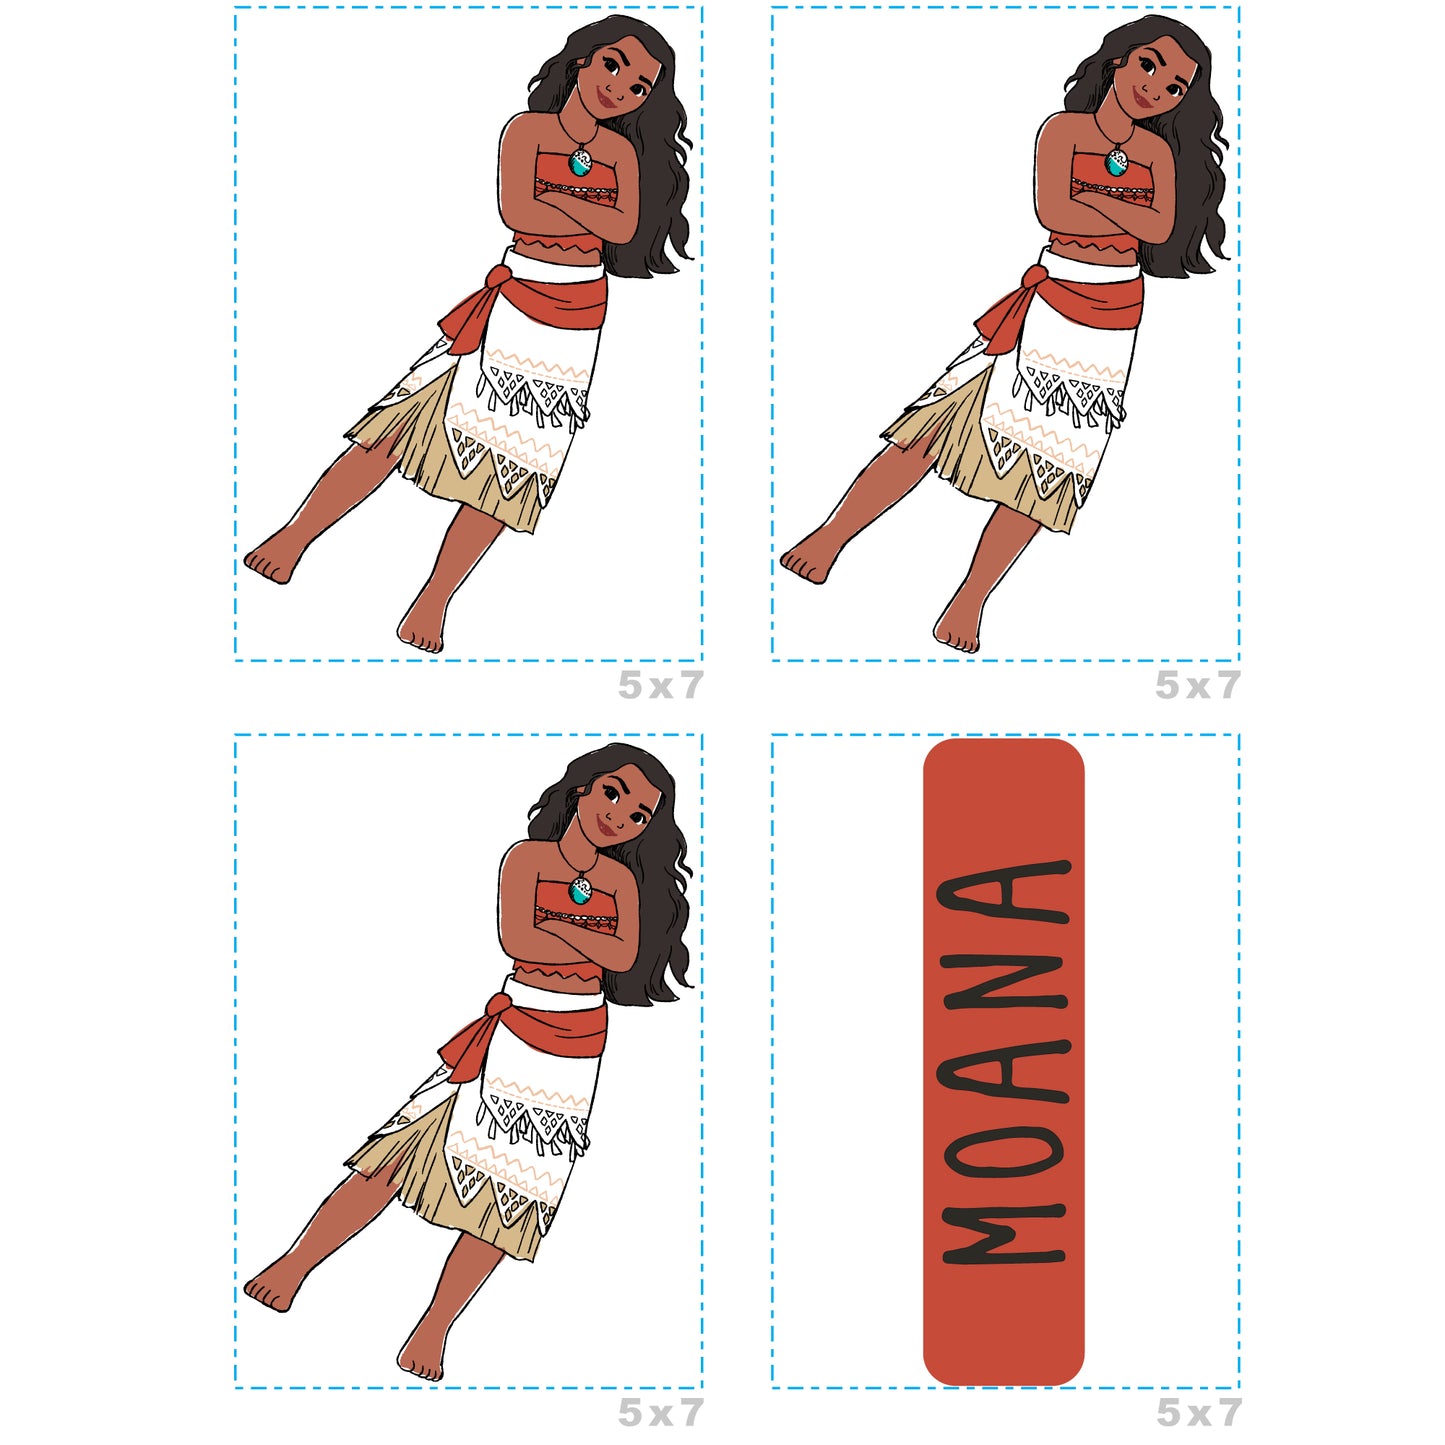 Sheet of 4 -Princesses: Moana Minis        - Officially Licensed Disney Removable Wall   Adhesive Decal